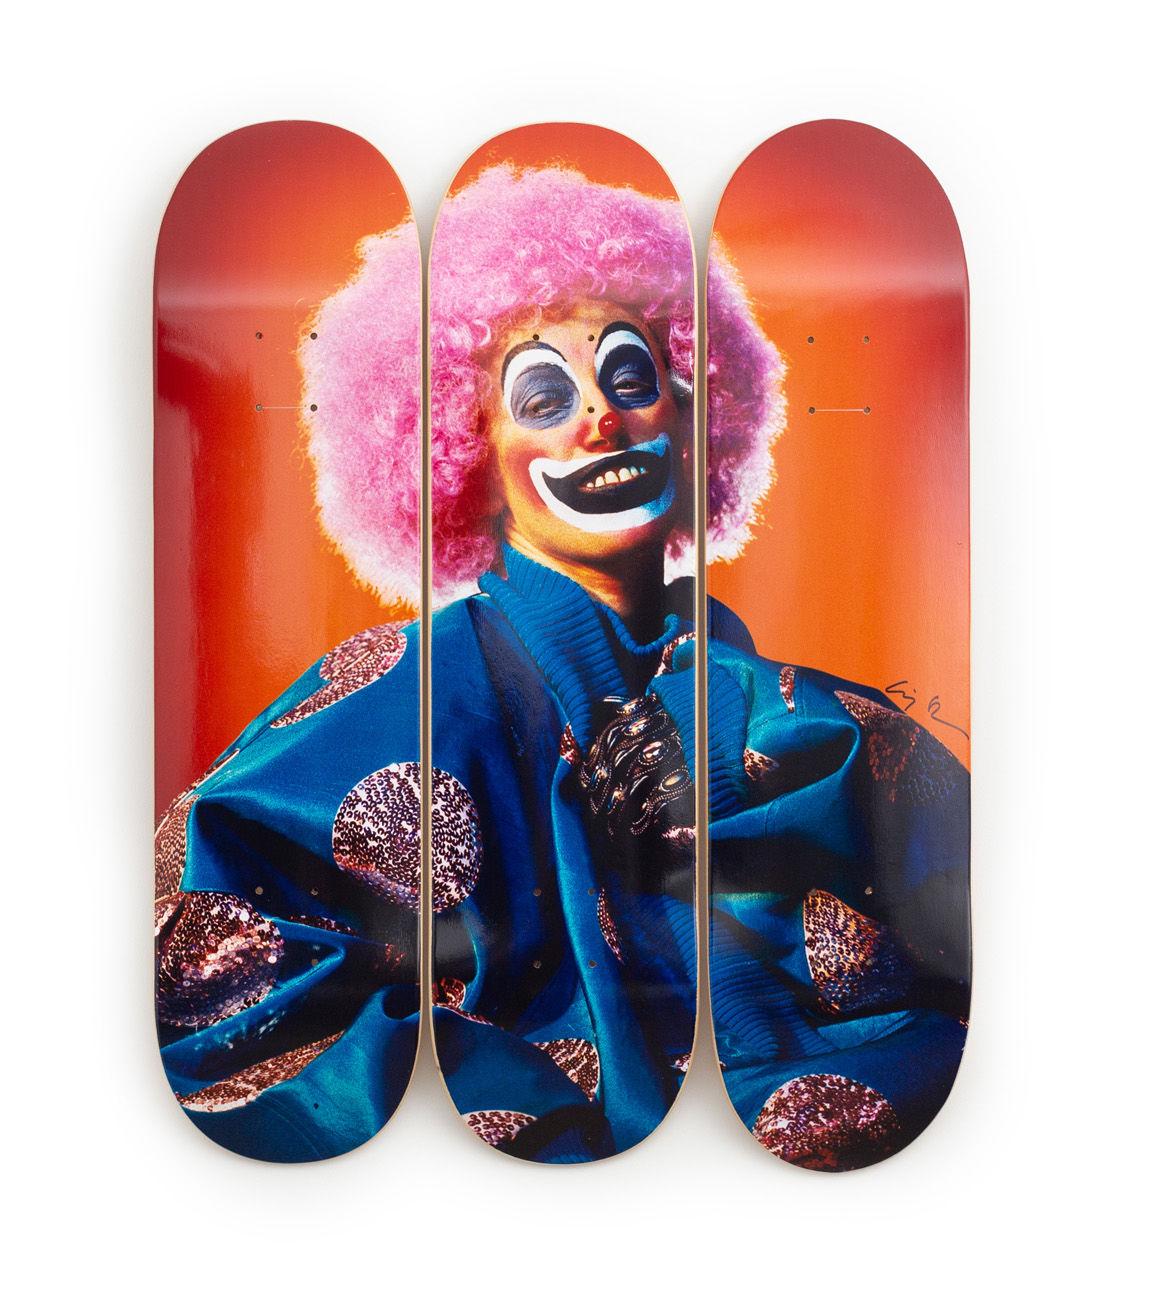 Cindy Sherman - UNTITLED #414 (CLOWNS. 2003)
Date of creation: 2022
Medium: Digital print on Canadian maple wood
Edition: 50
Size: 80 x 20 cm (each skate)
Condition: In mint conditions and never displayed
This triptych is formed by three skate decks